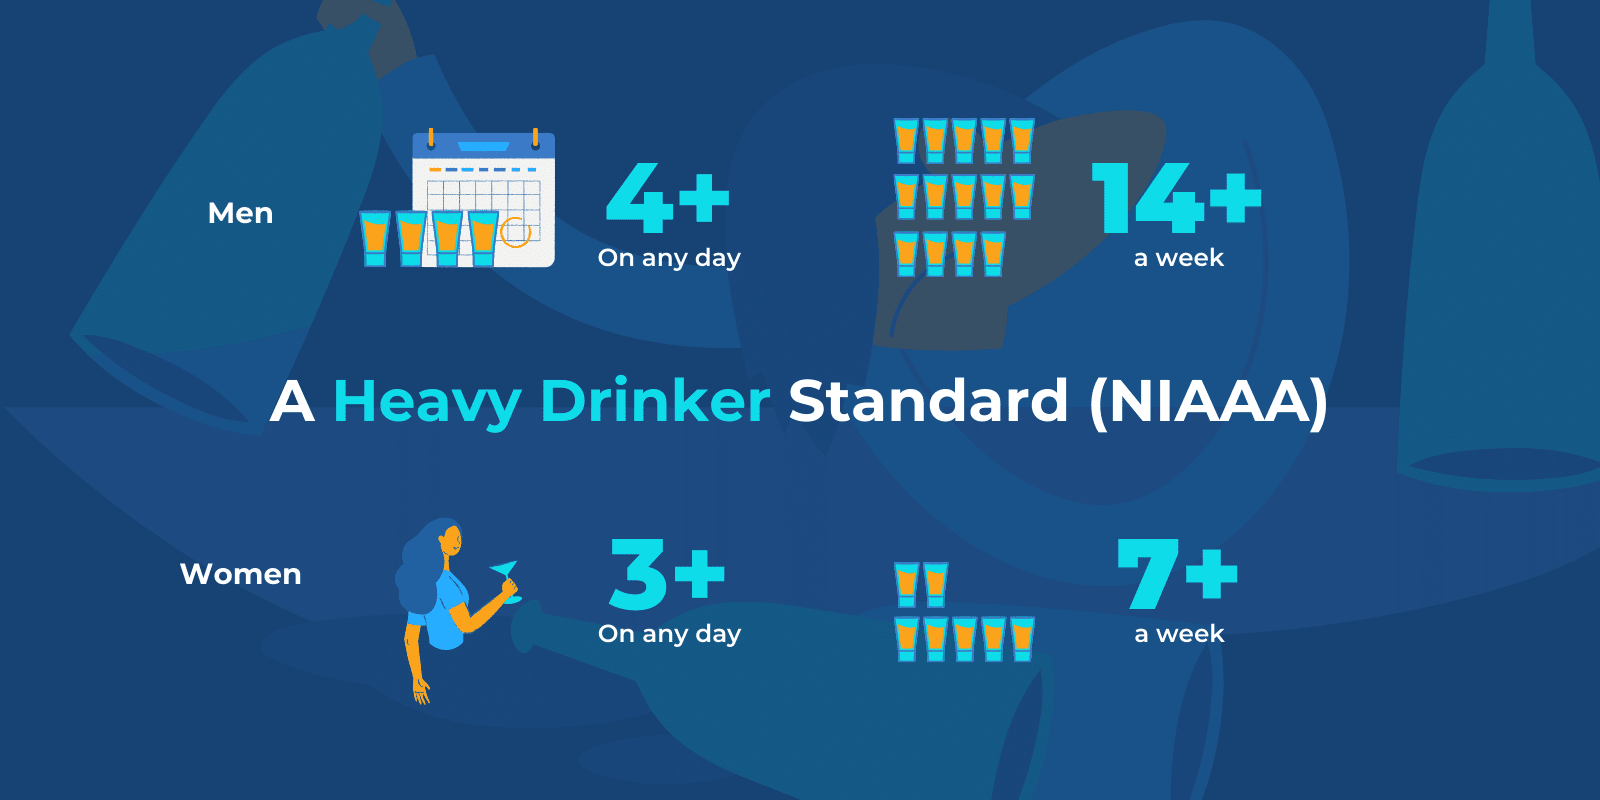 A heavy drinker standard based on NIAAA standard with relevant icons